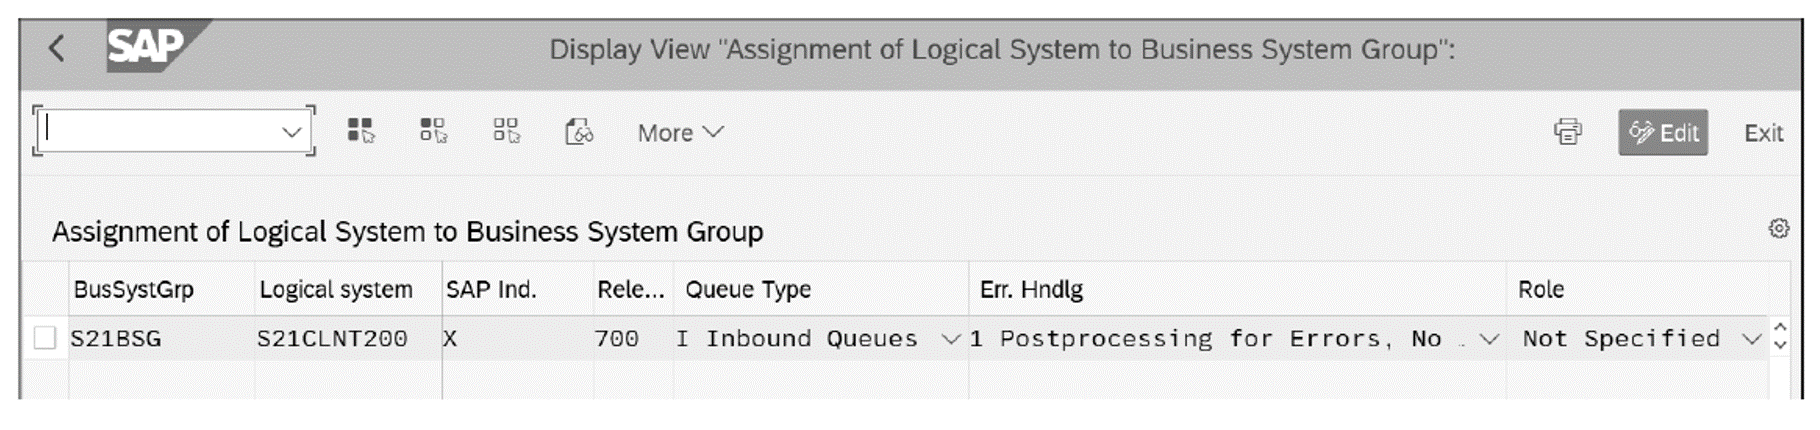 Assignment of the Logical System